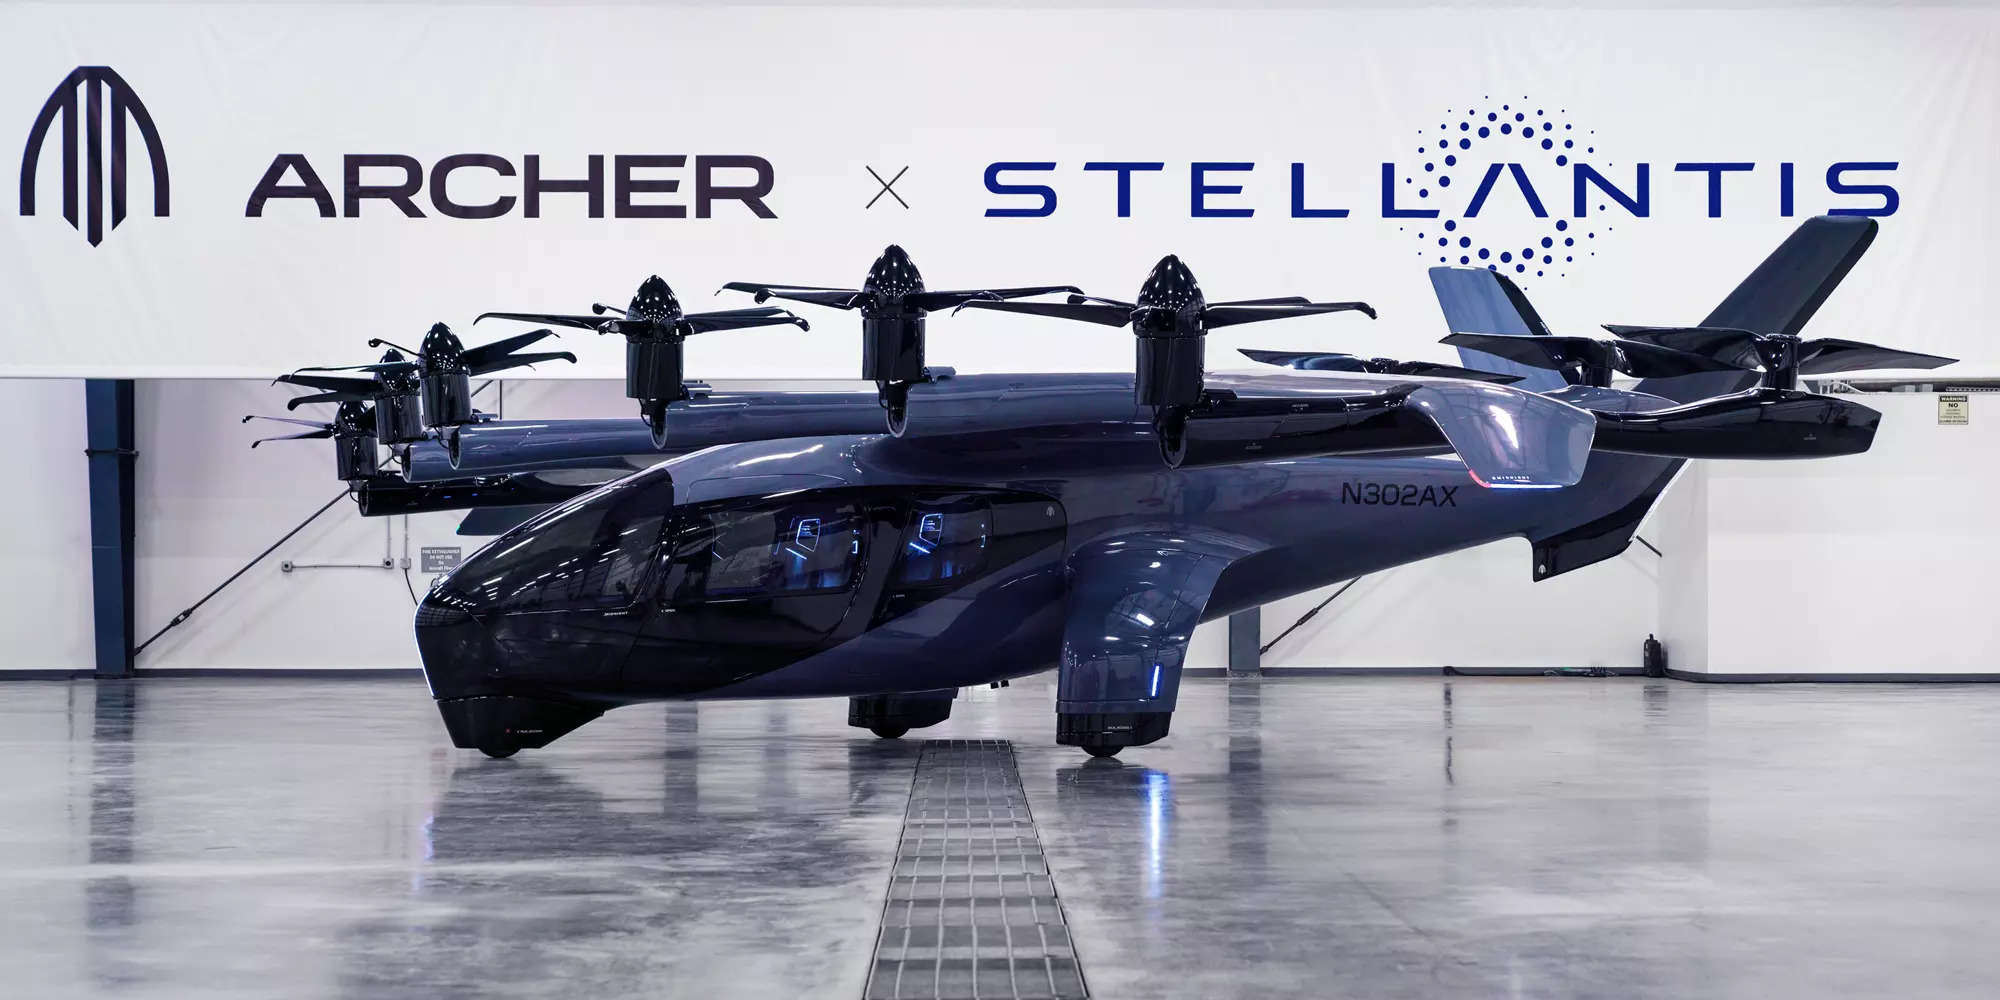 <p>Archer’s Midnight aircraft is designed to be safe, sustainable, quiet and carry four passengers plus a pilot. Midnight is optimized for back-to-back short distance trips of around 20-50 miles.</p>